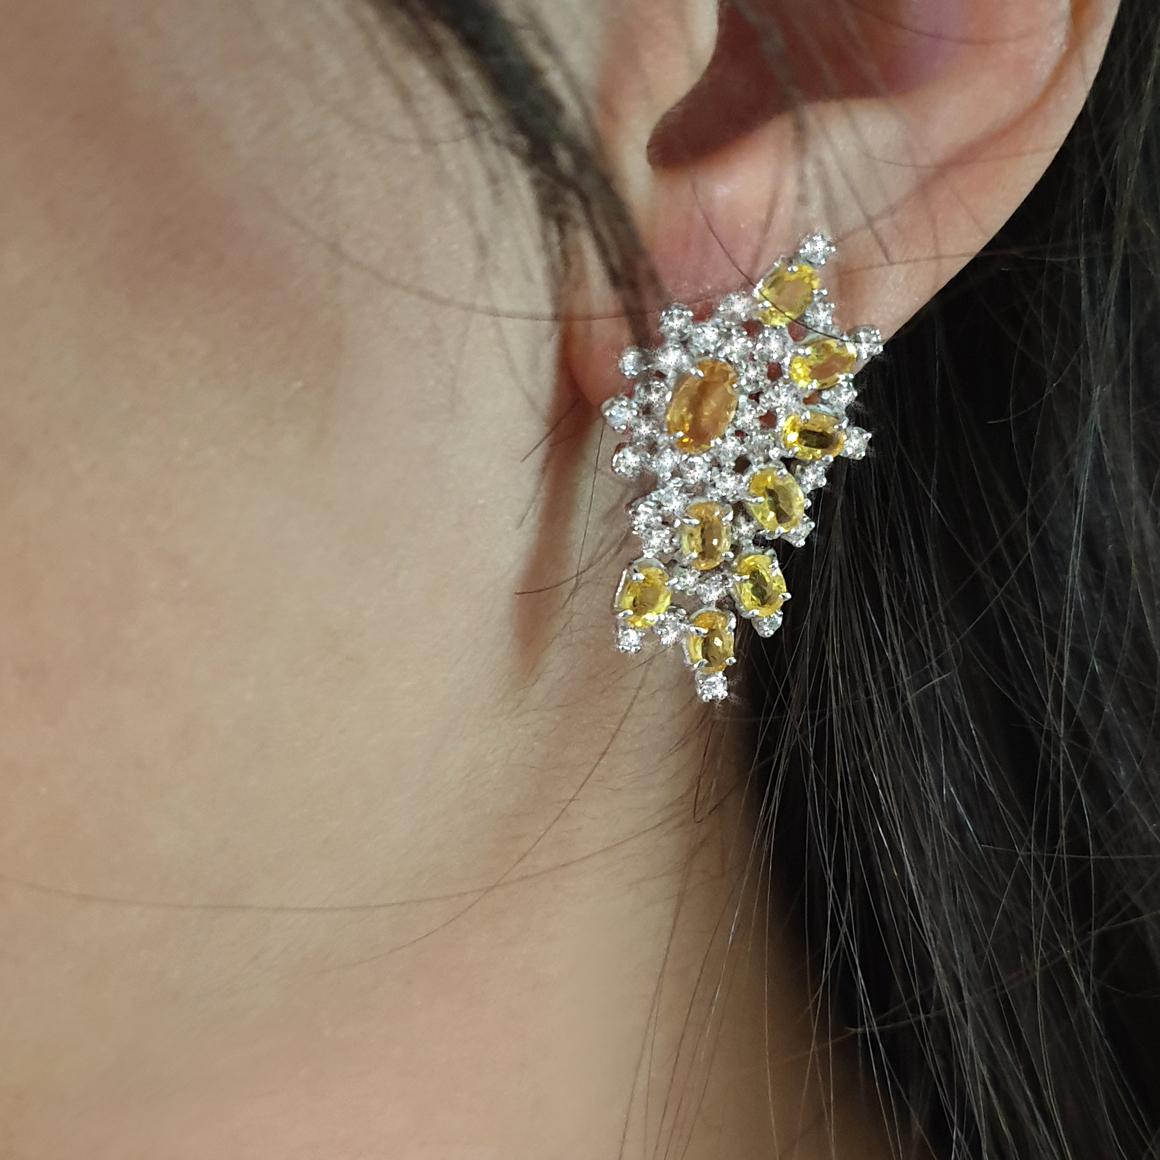 Contemporary  earrings made from Stanoppi Jewellery is part of a unique collection designed and inspired by Queen's Jewels, all handmade in Italy by expert goldsmith.
Designed and Handmade in Italy.
Earrings in 18kt white gold with yellow sapphire